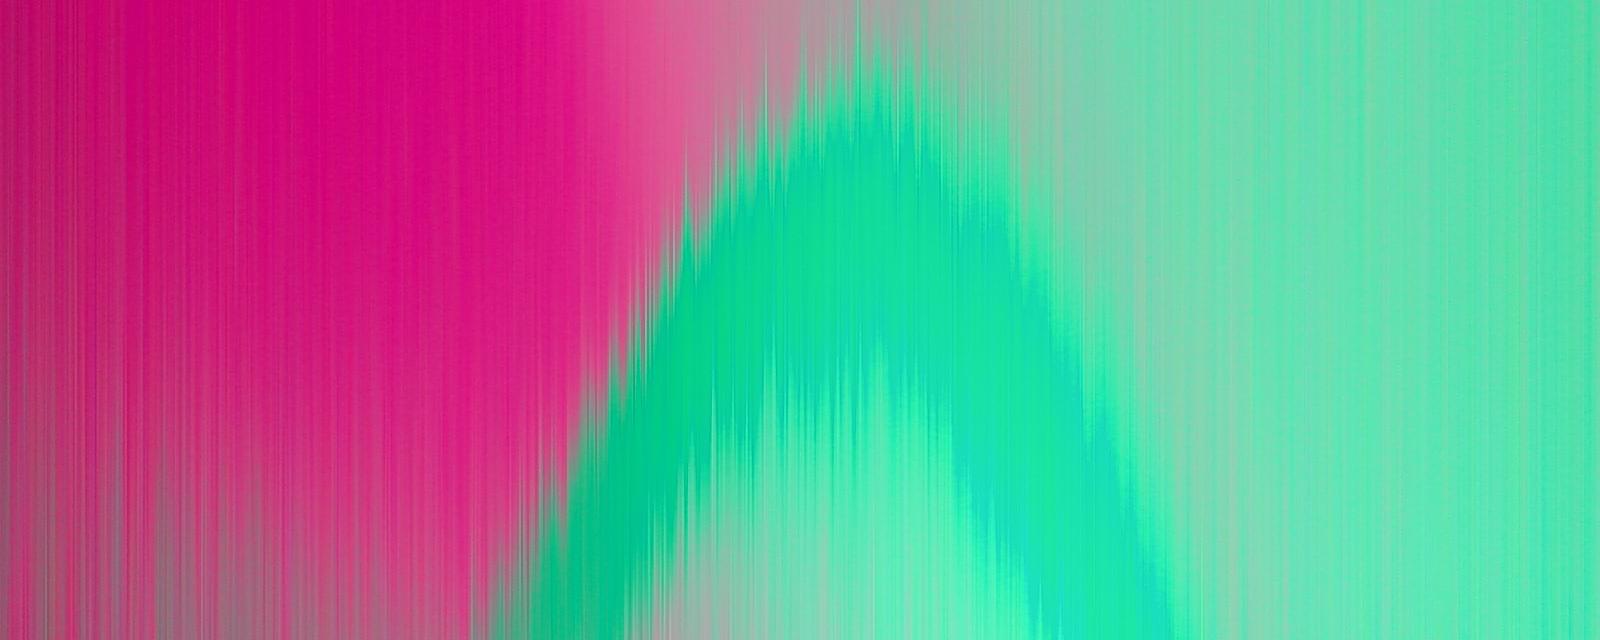 Very bright and sharp pixelated image consisting of multiple gradients from yellow-green on the left to pink/magenta on the right; also a cyan to magenta to black gradient runs along the very bottom of the image. All gradients are striated as thought like digital hair.